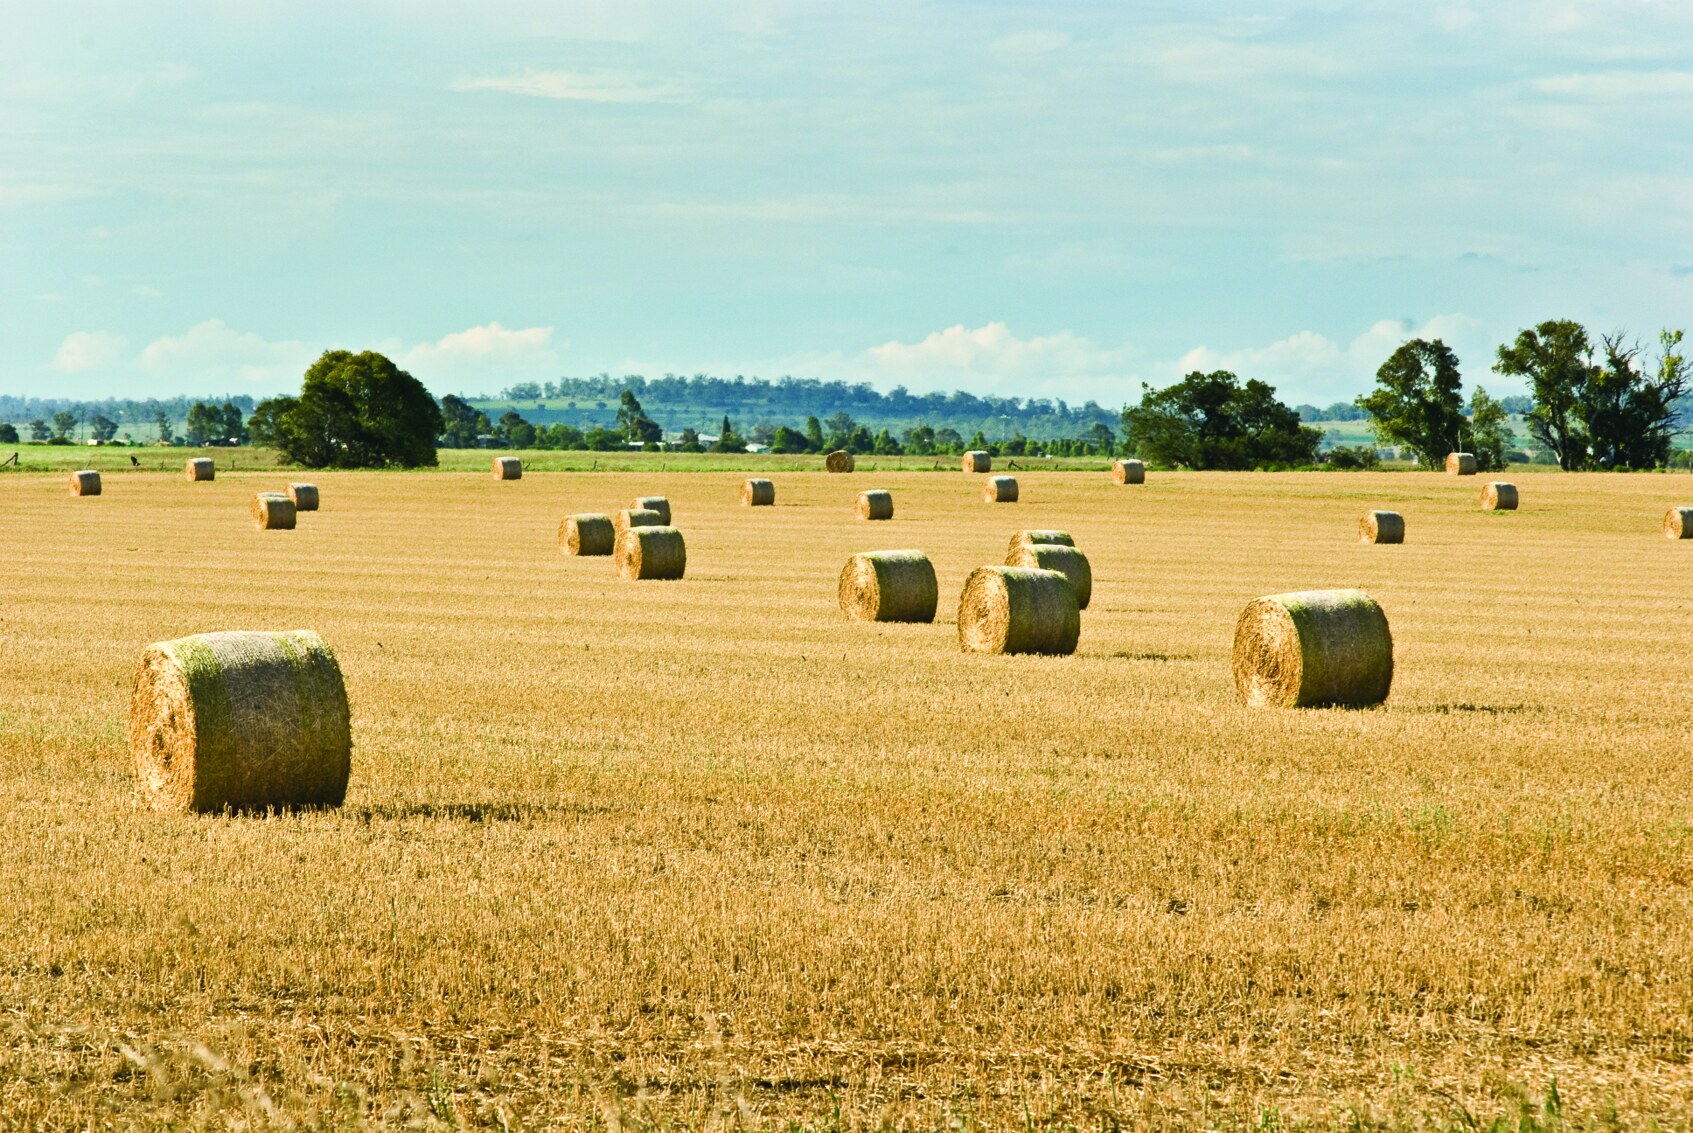 Rolled hay bales in a golden field against a pale blue sky in Toowoomba, Darling Downs, Queensland